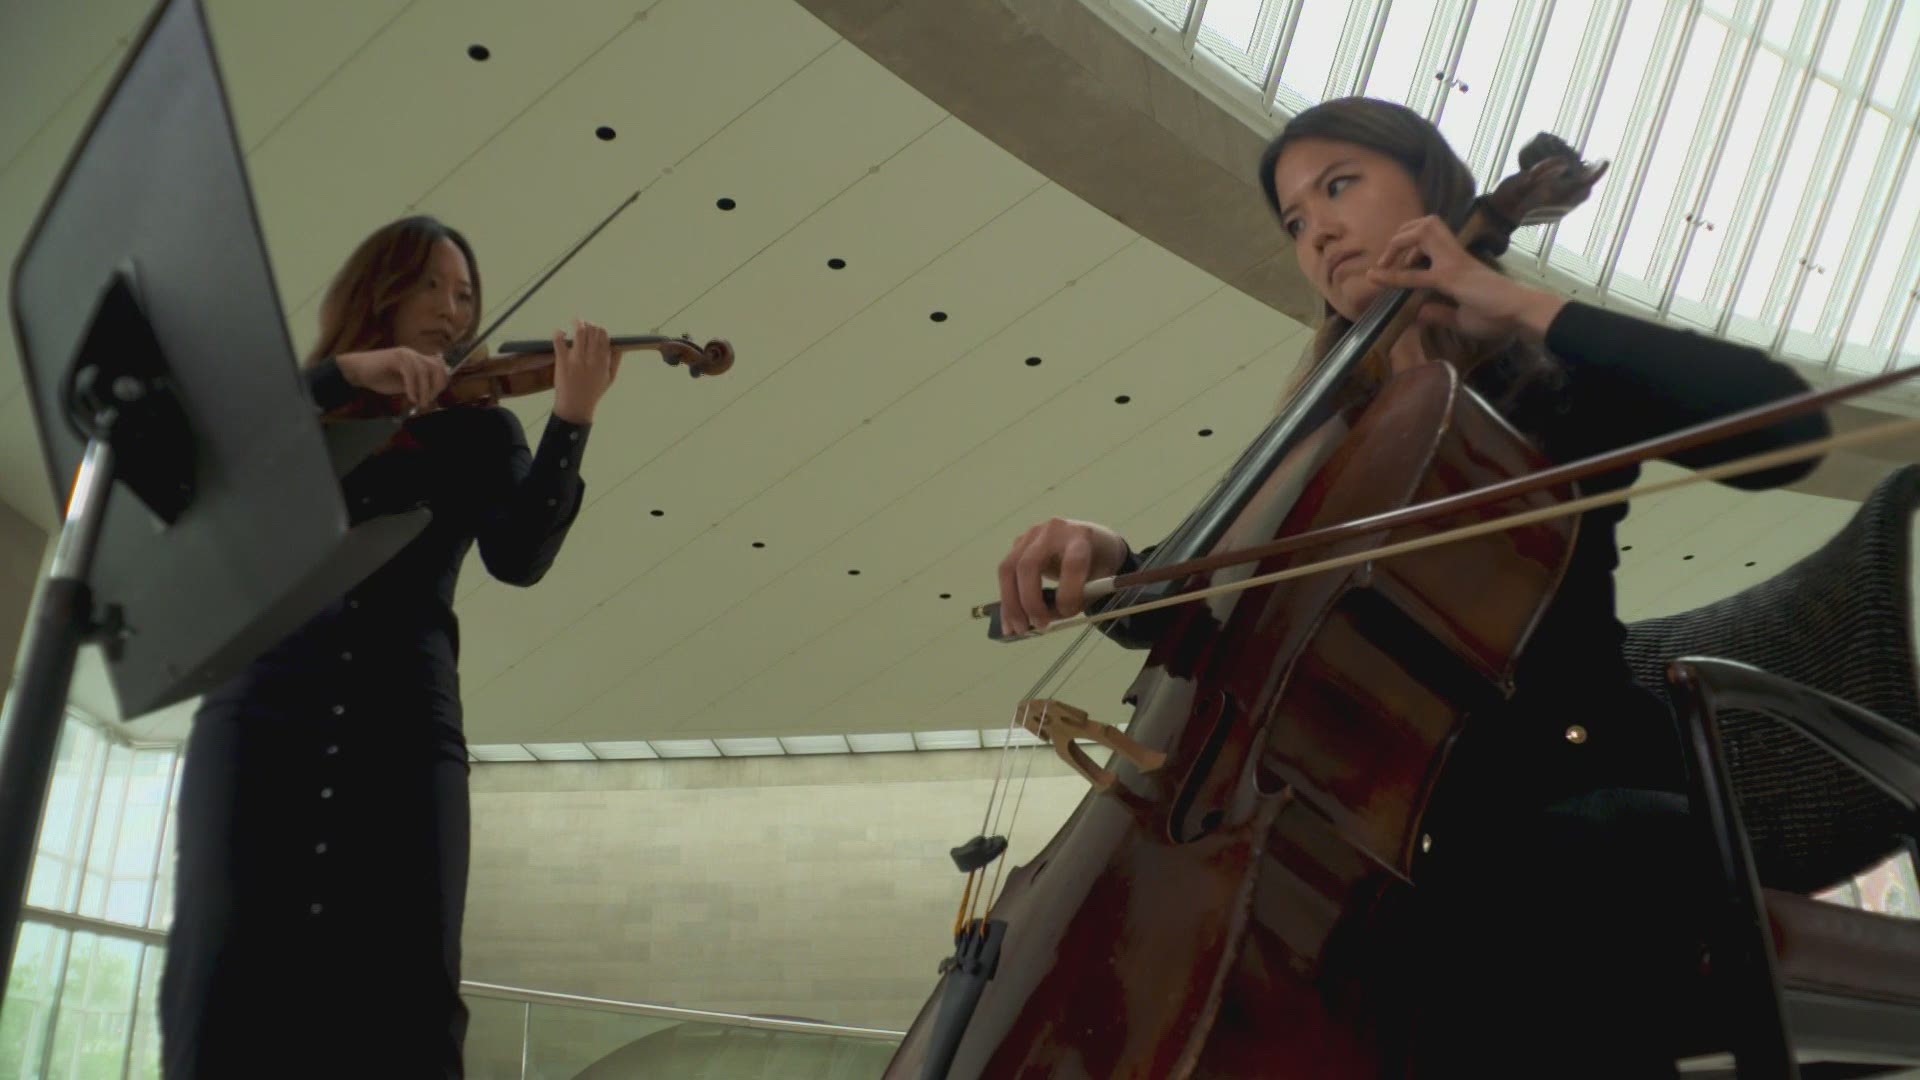 The pandemic music was silenced for both sisters, but this weekend they get to play together at a Dallas Symphony Orchestra concert.